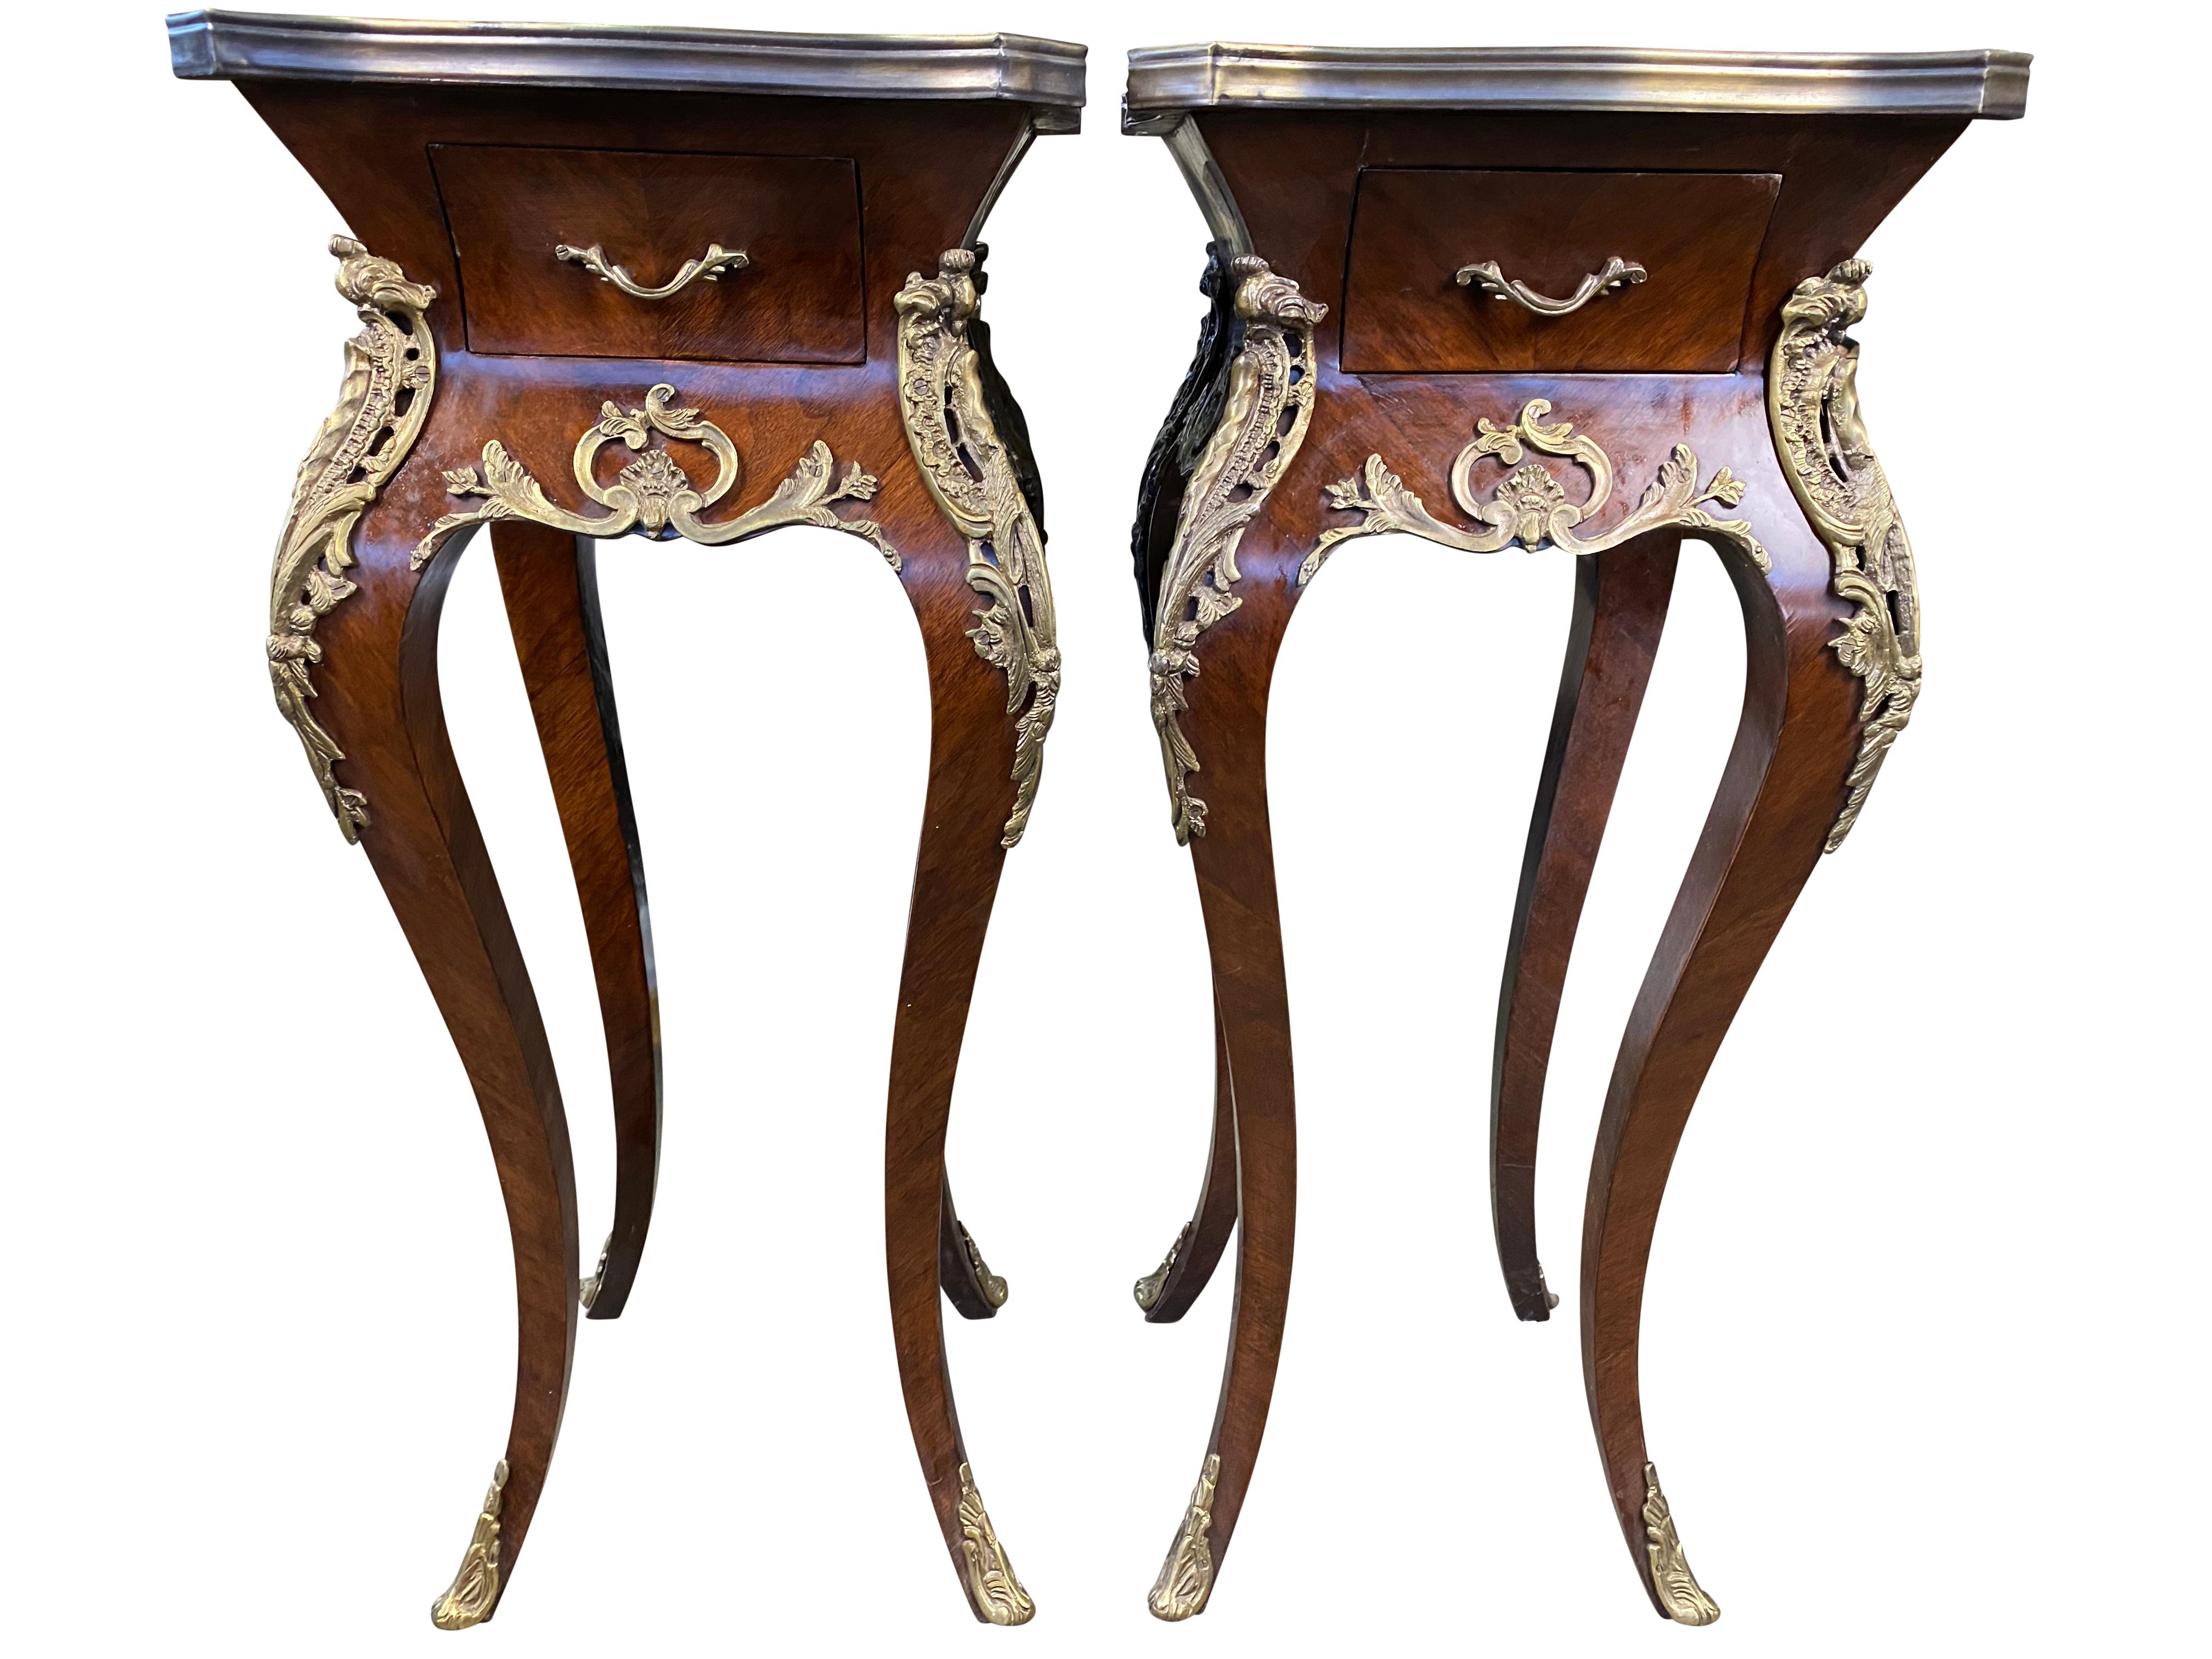 Two incredibly well-crafted French kingwood side tables with beautifully gilded and curved legs. A draw and lavish handle is fitted to each table too. Perfect from home interior.

Dimensions (cm)
80 H, 36 W, 36 D.